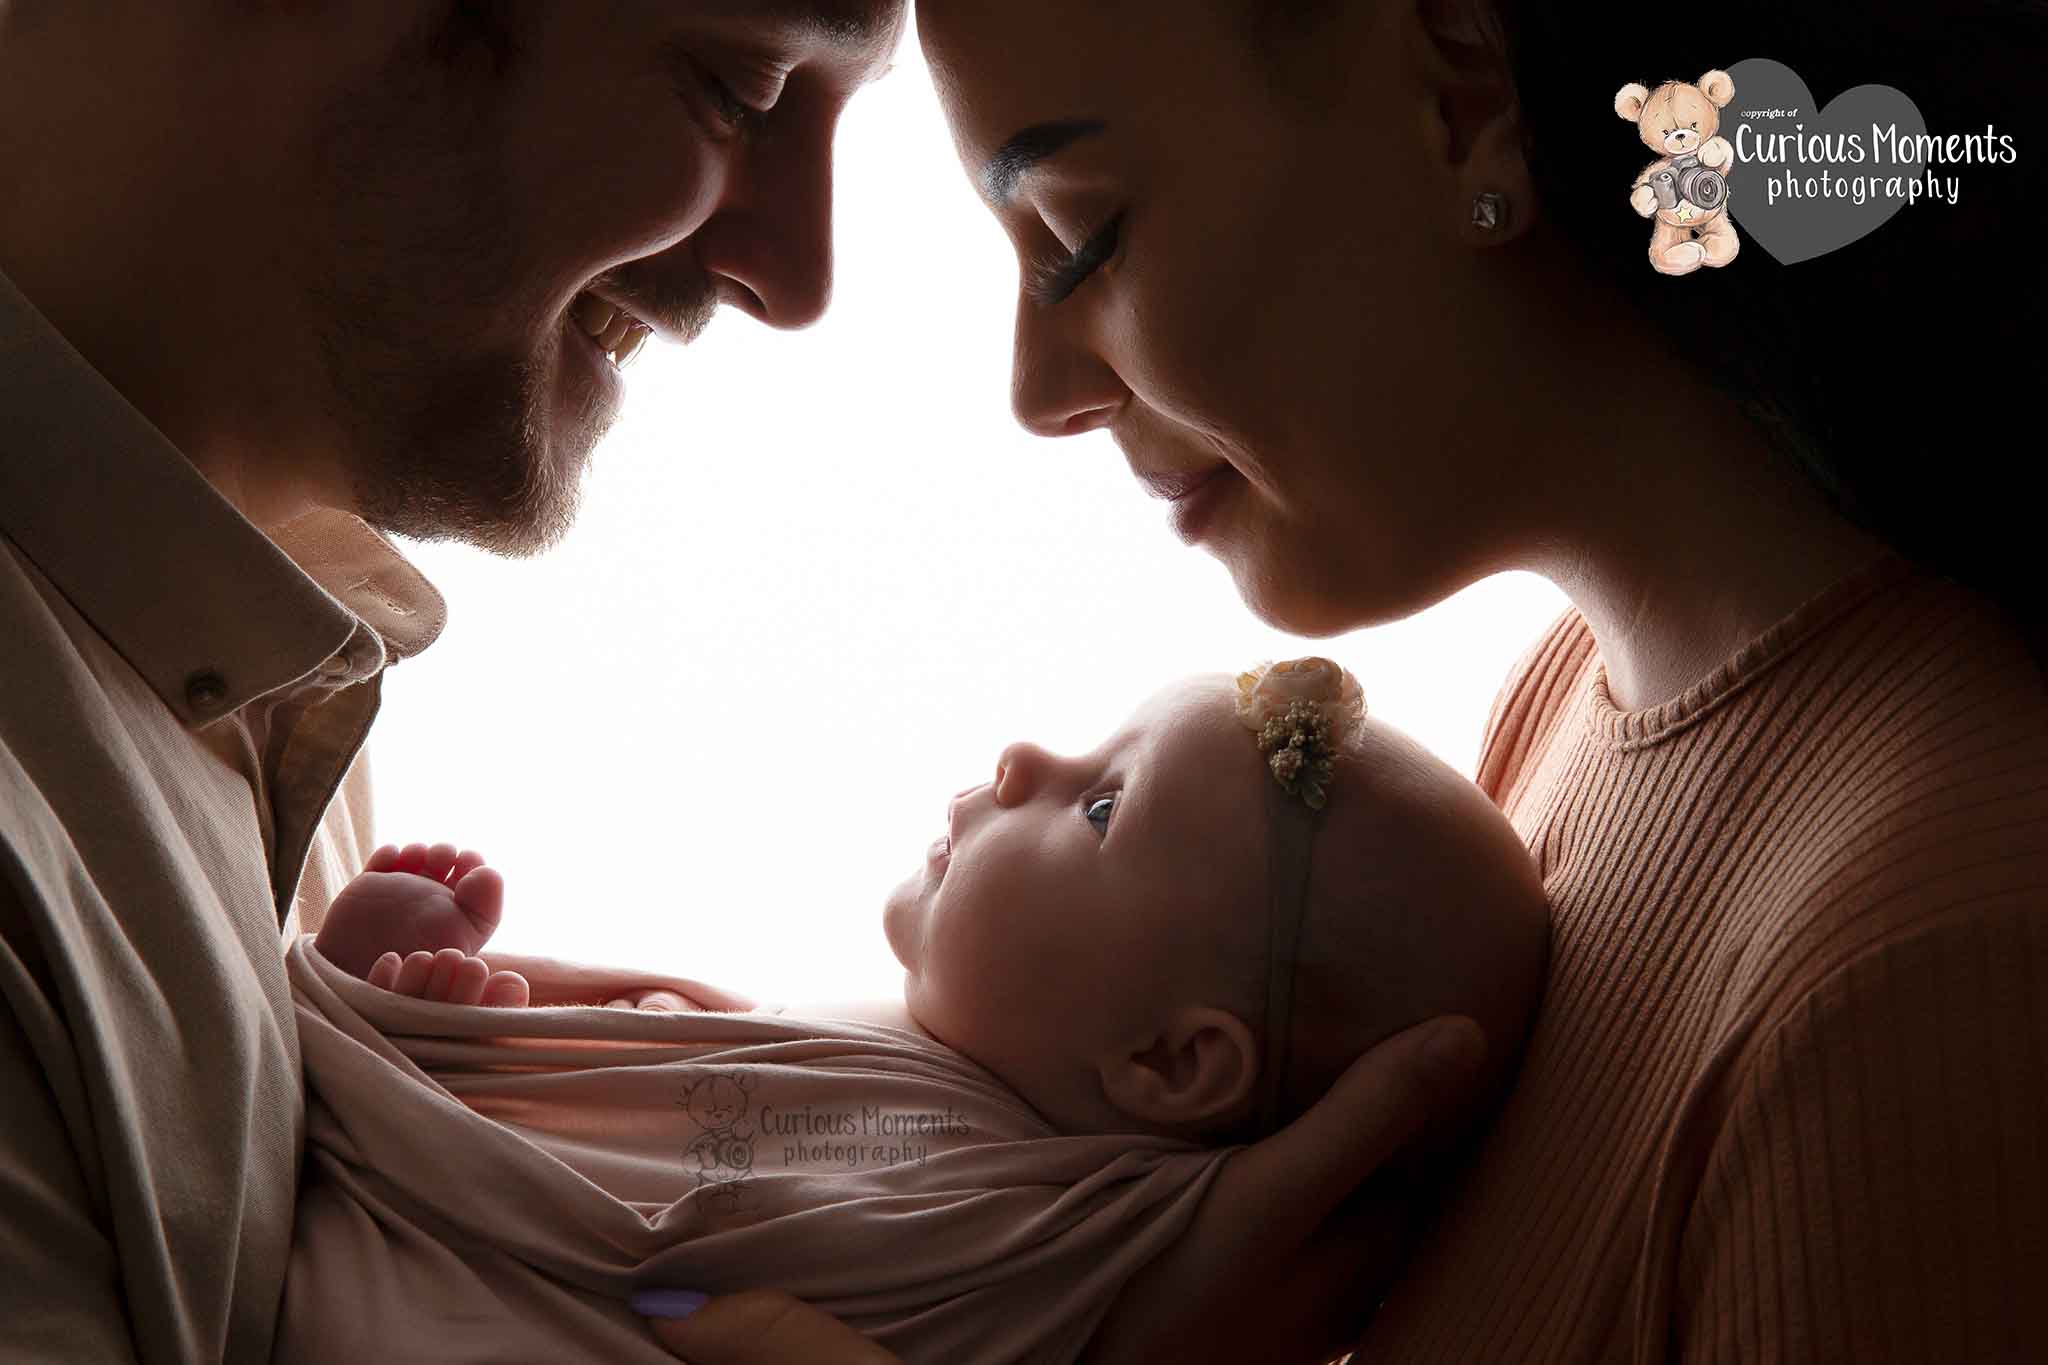 Backlit image of new parent holding baby girl during their newborn photoshoot pembrokeshire